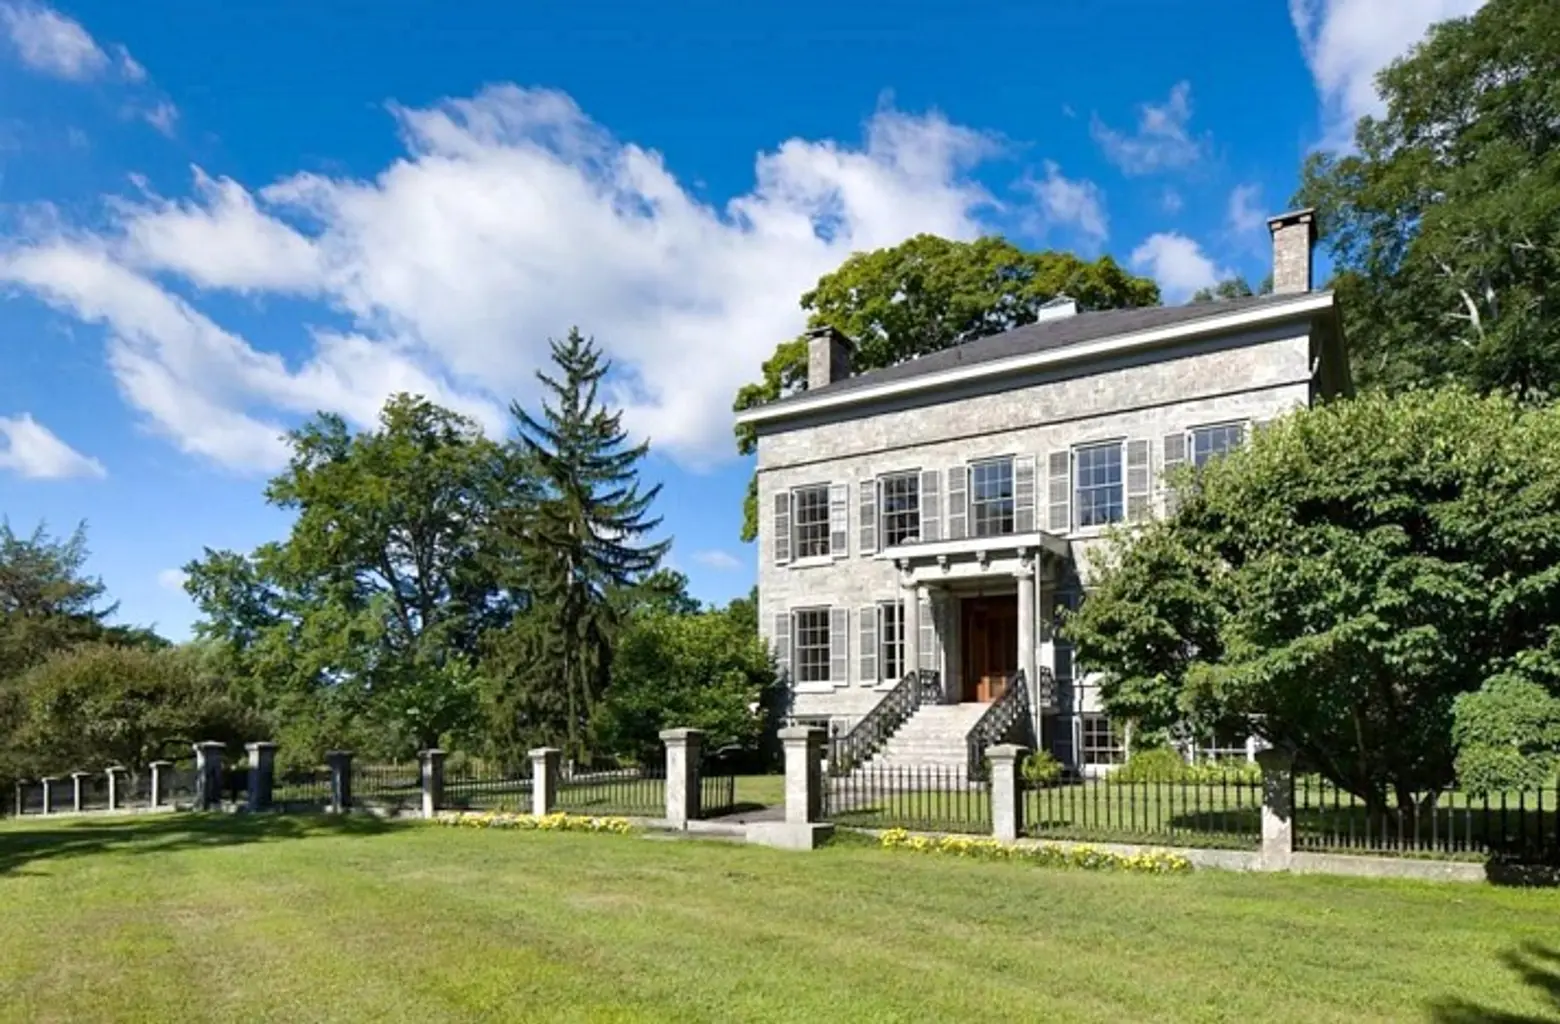 Gerard Crane House, 413 Route 202, Somers NY, Greek Revival mansion,